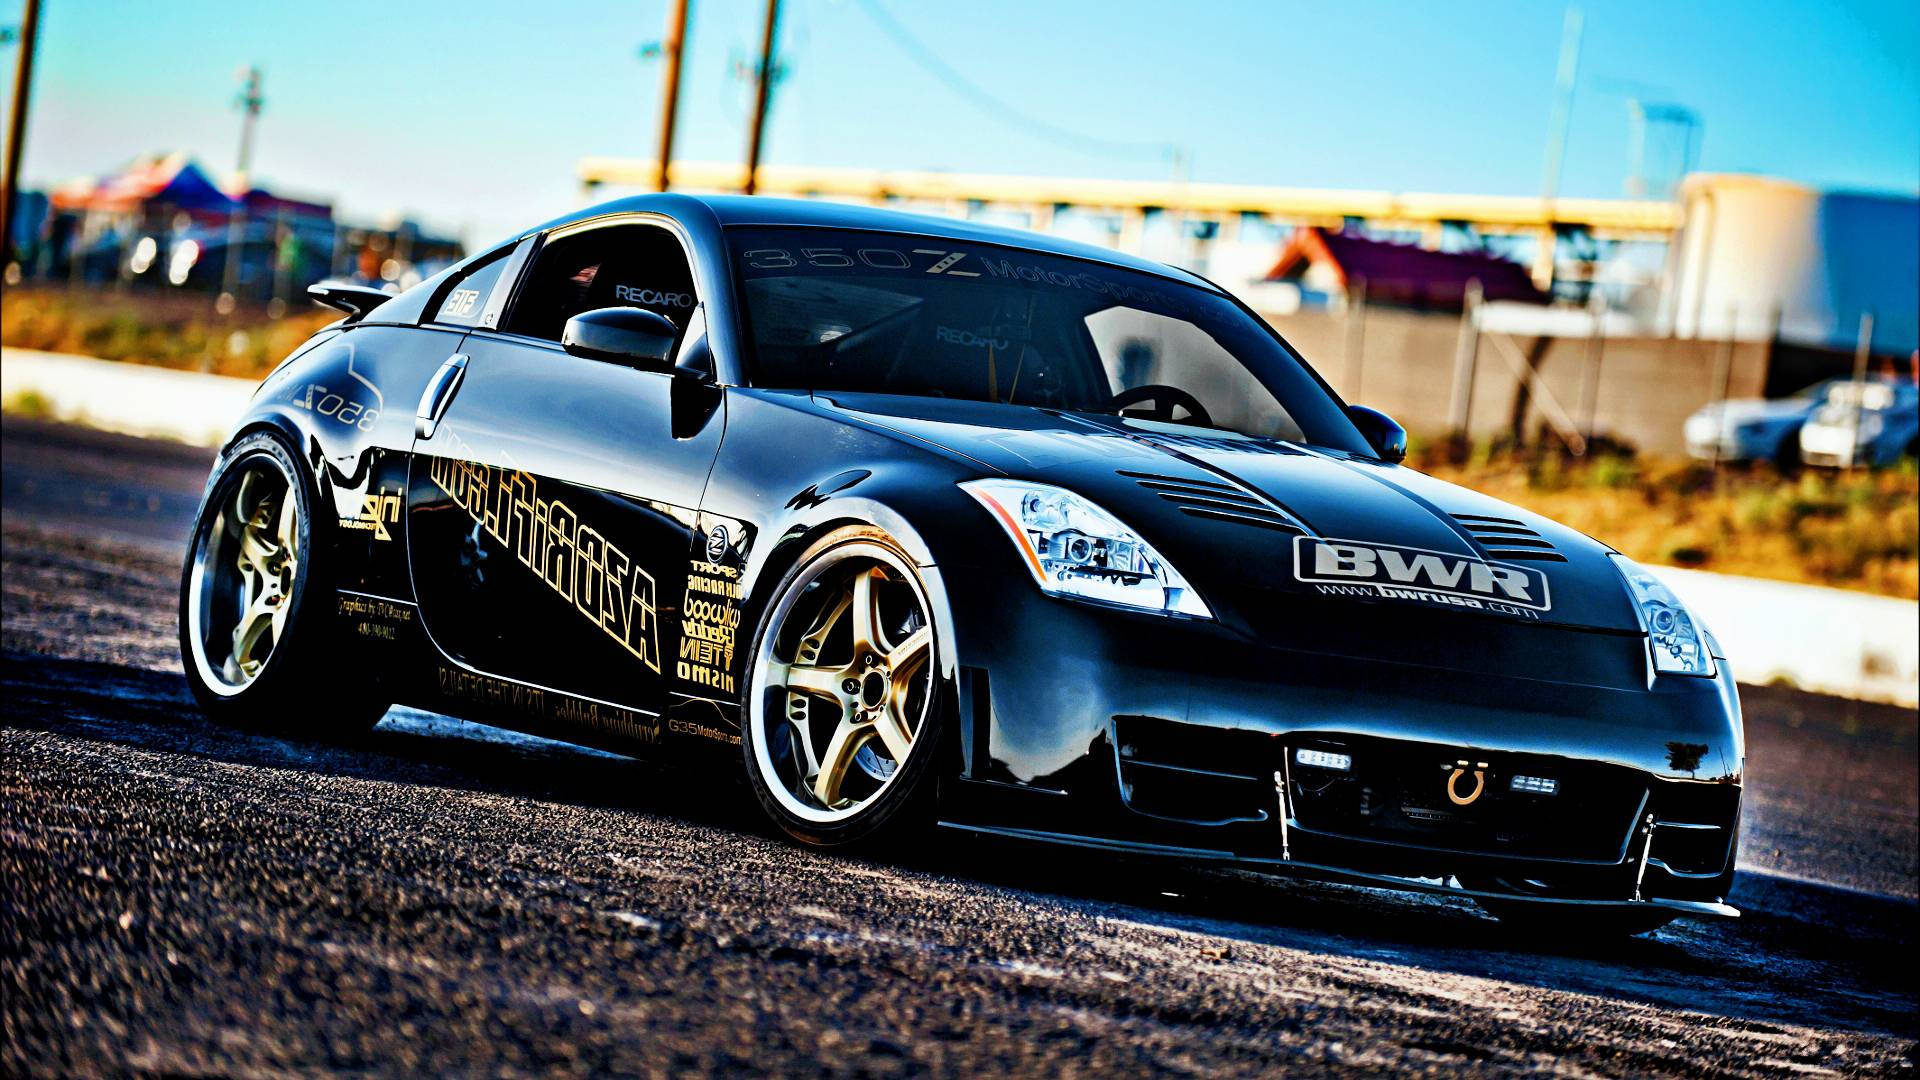 The Nissan 350Z: An Iconic&Fun-To-Drive Sports Car Wallpaper